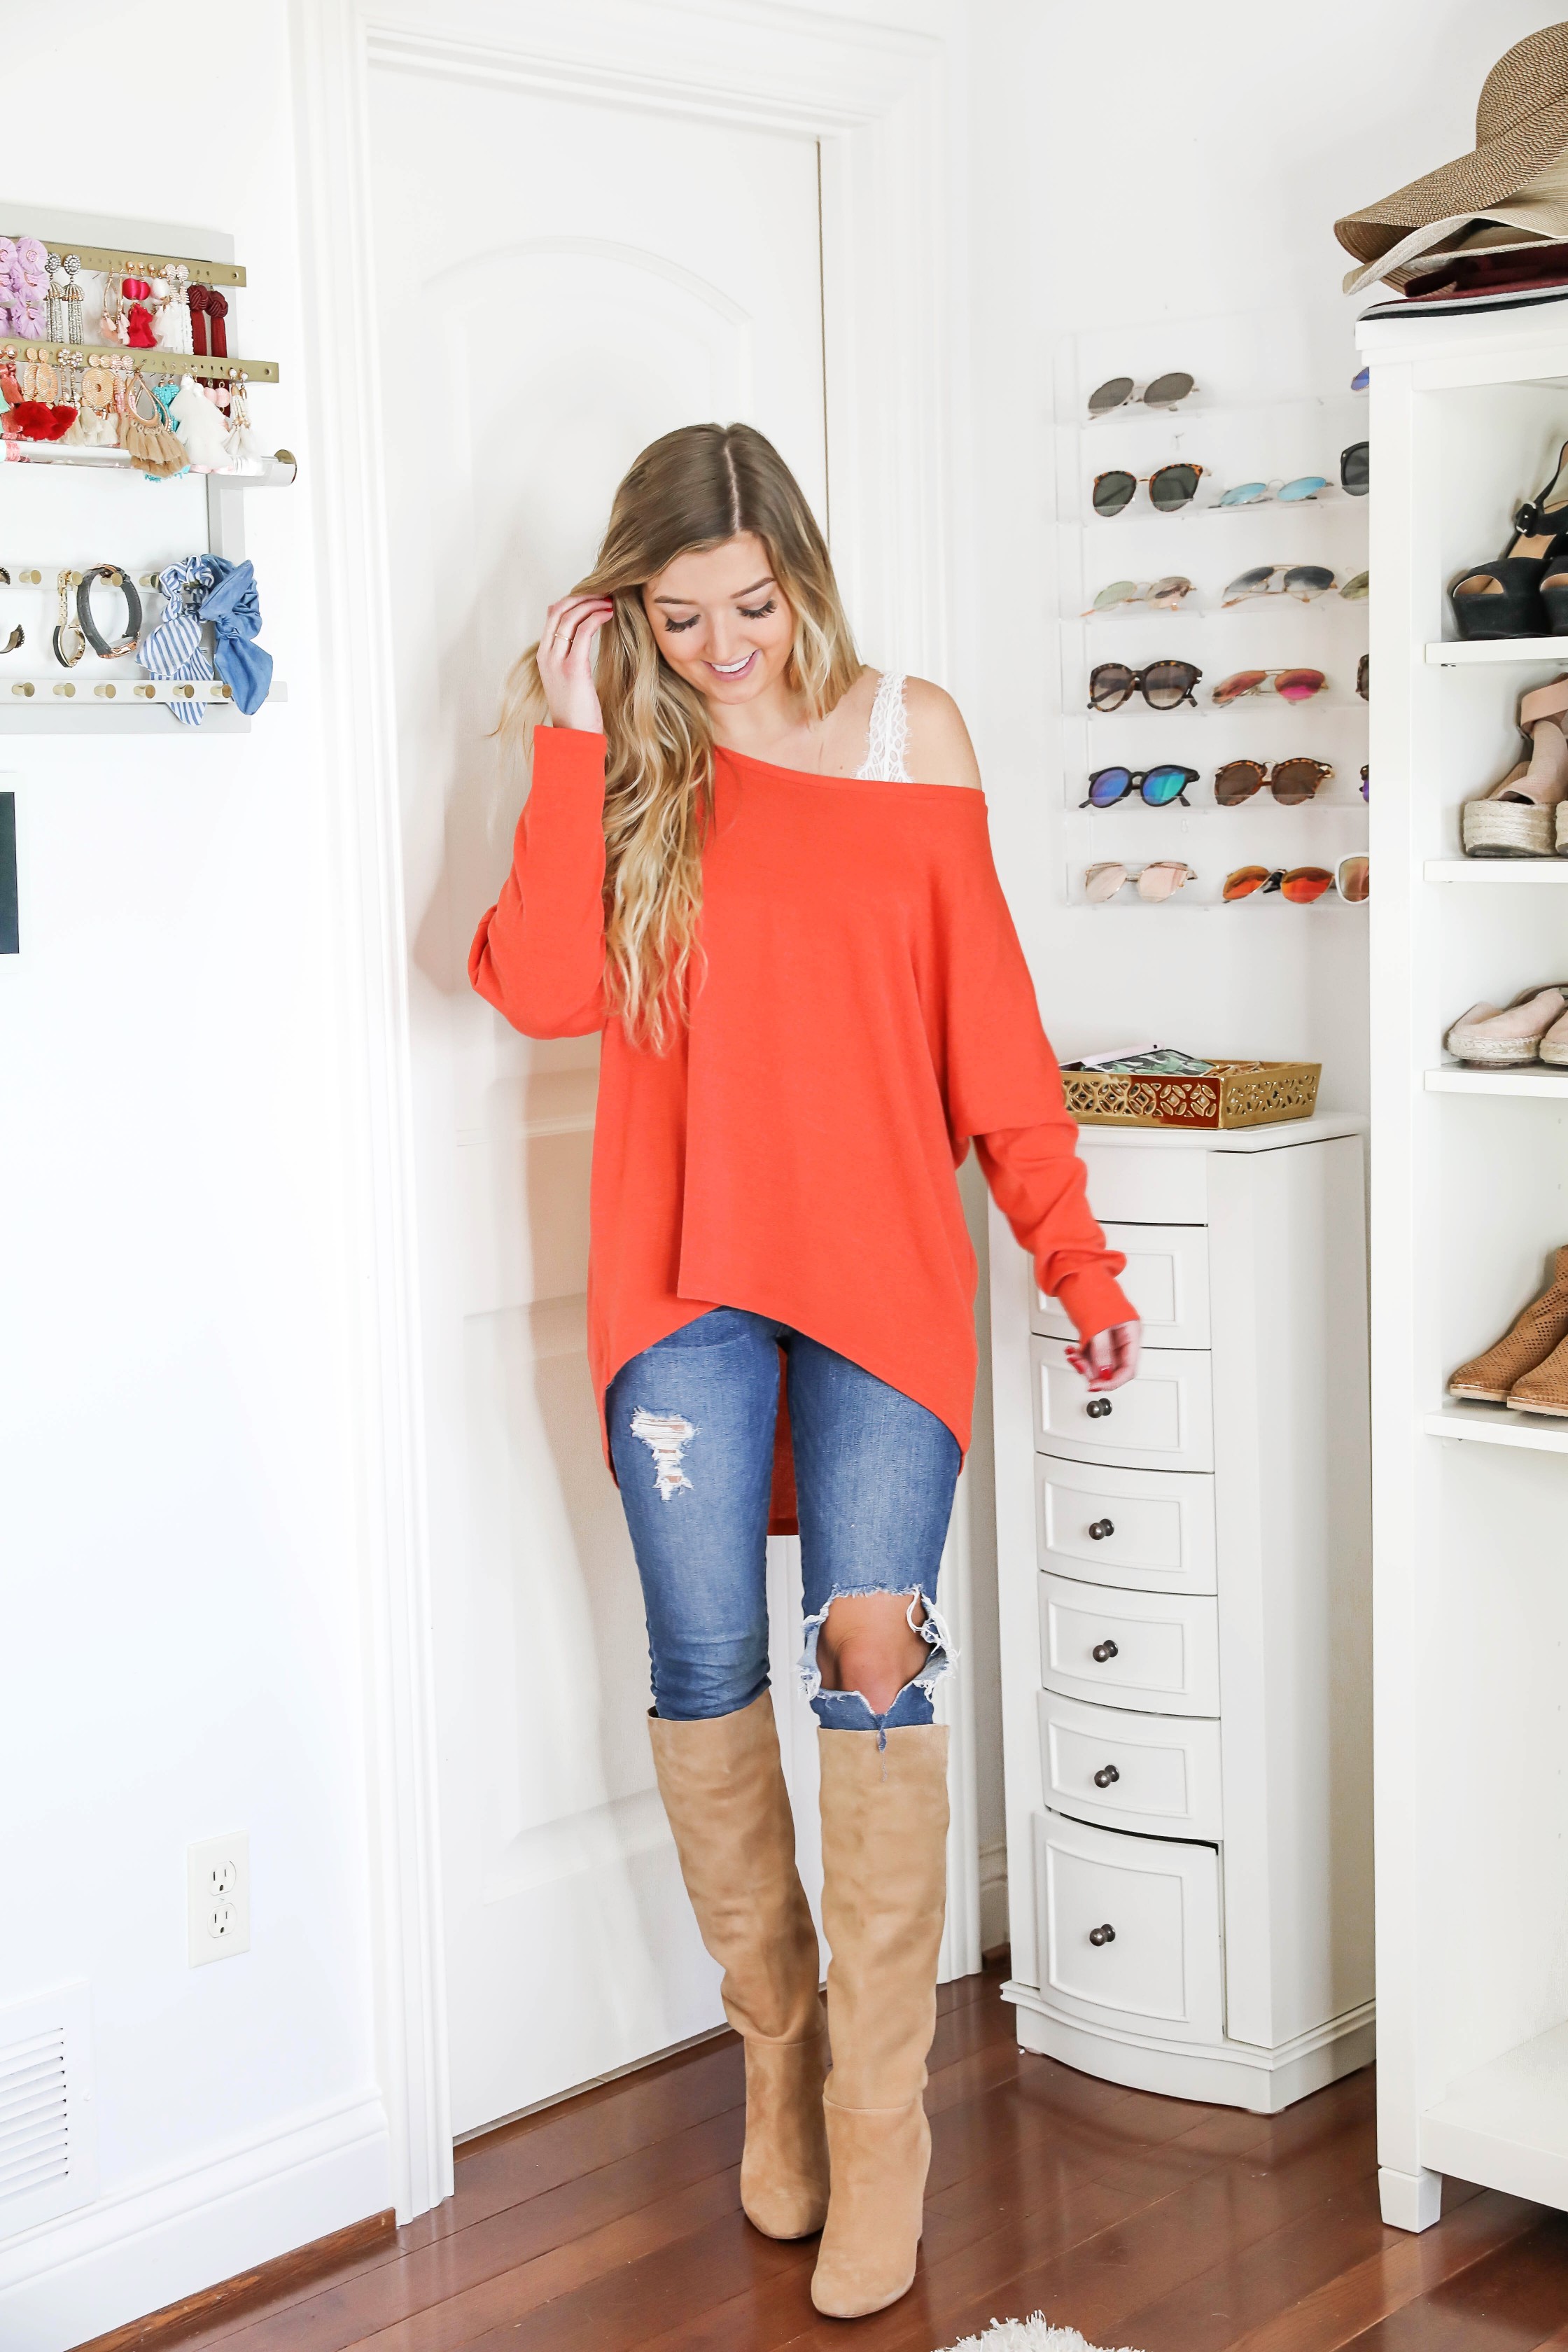 Back to school clothing under $30! A HUGE haul from Amazon fashion and other stores! Tons of fall clothing ideas and fall outfits put together! See the haul and get details on daily dose of charm by lauren lindmark